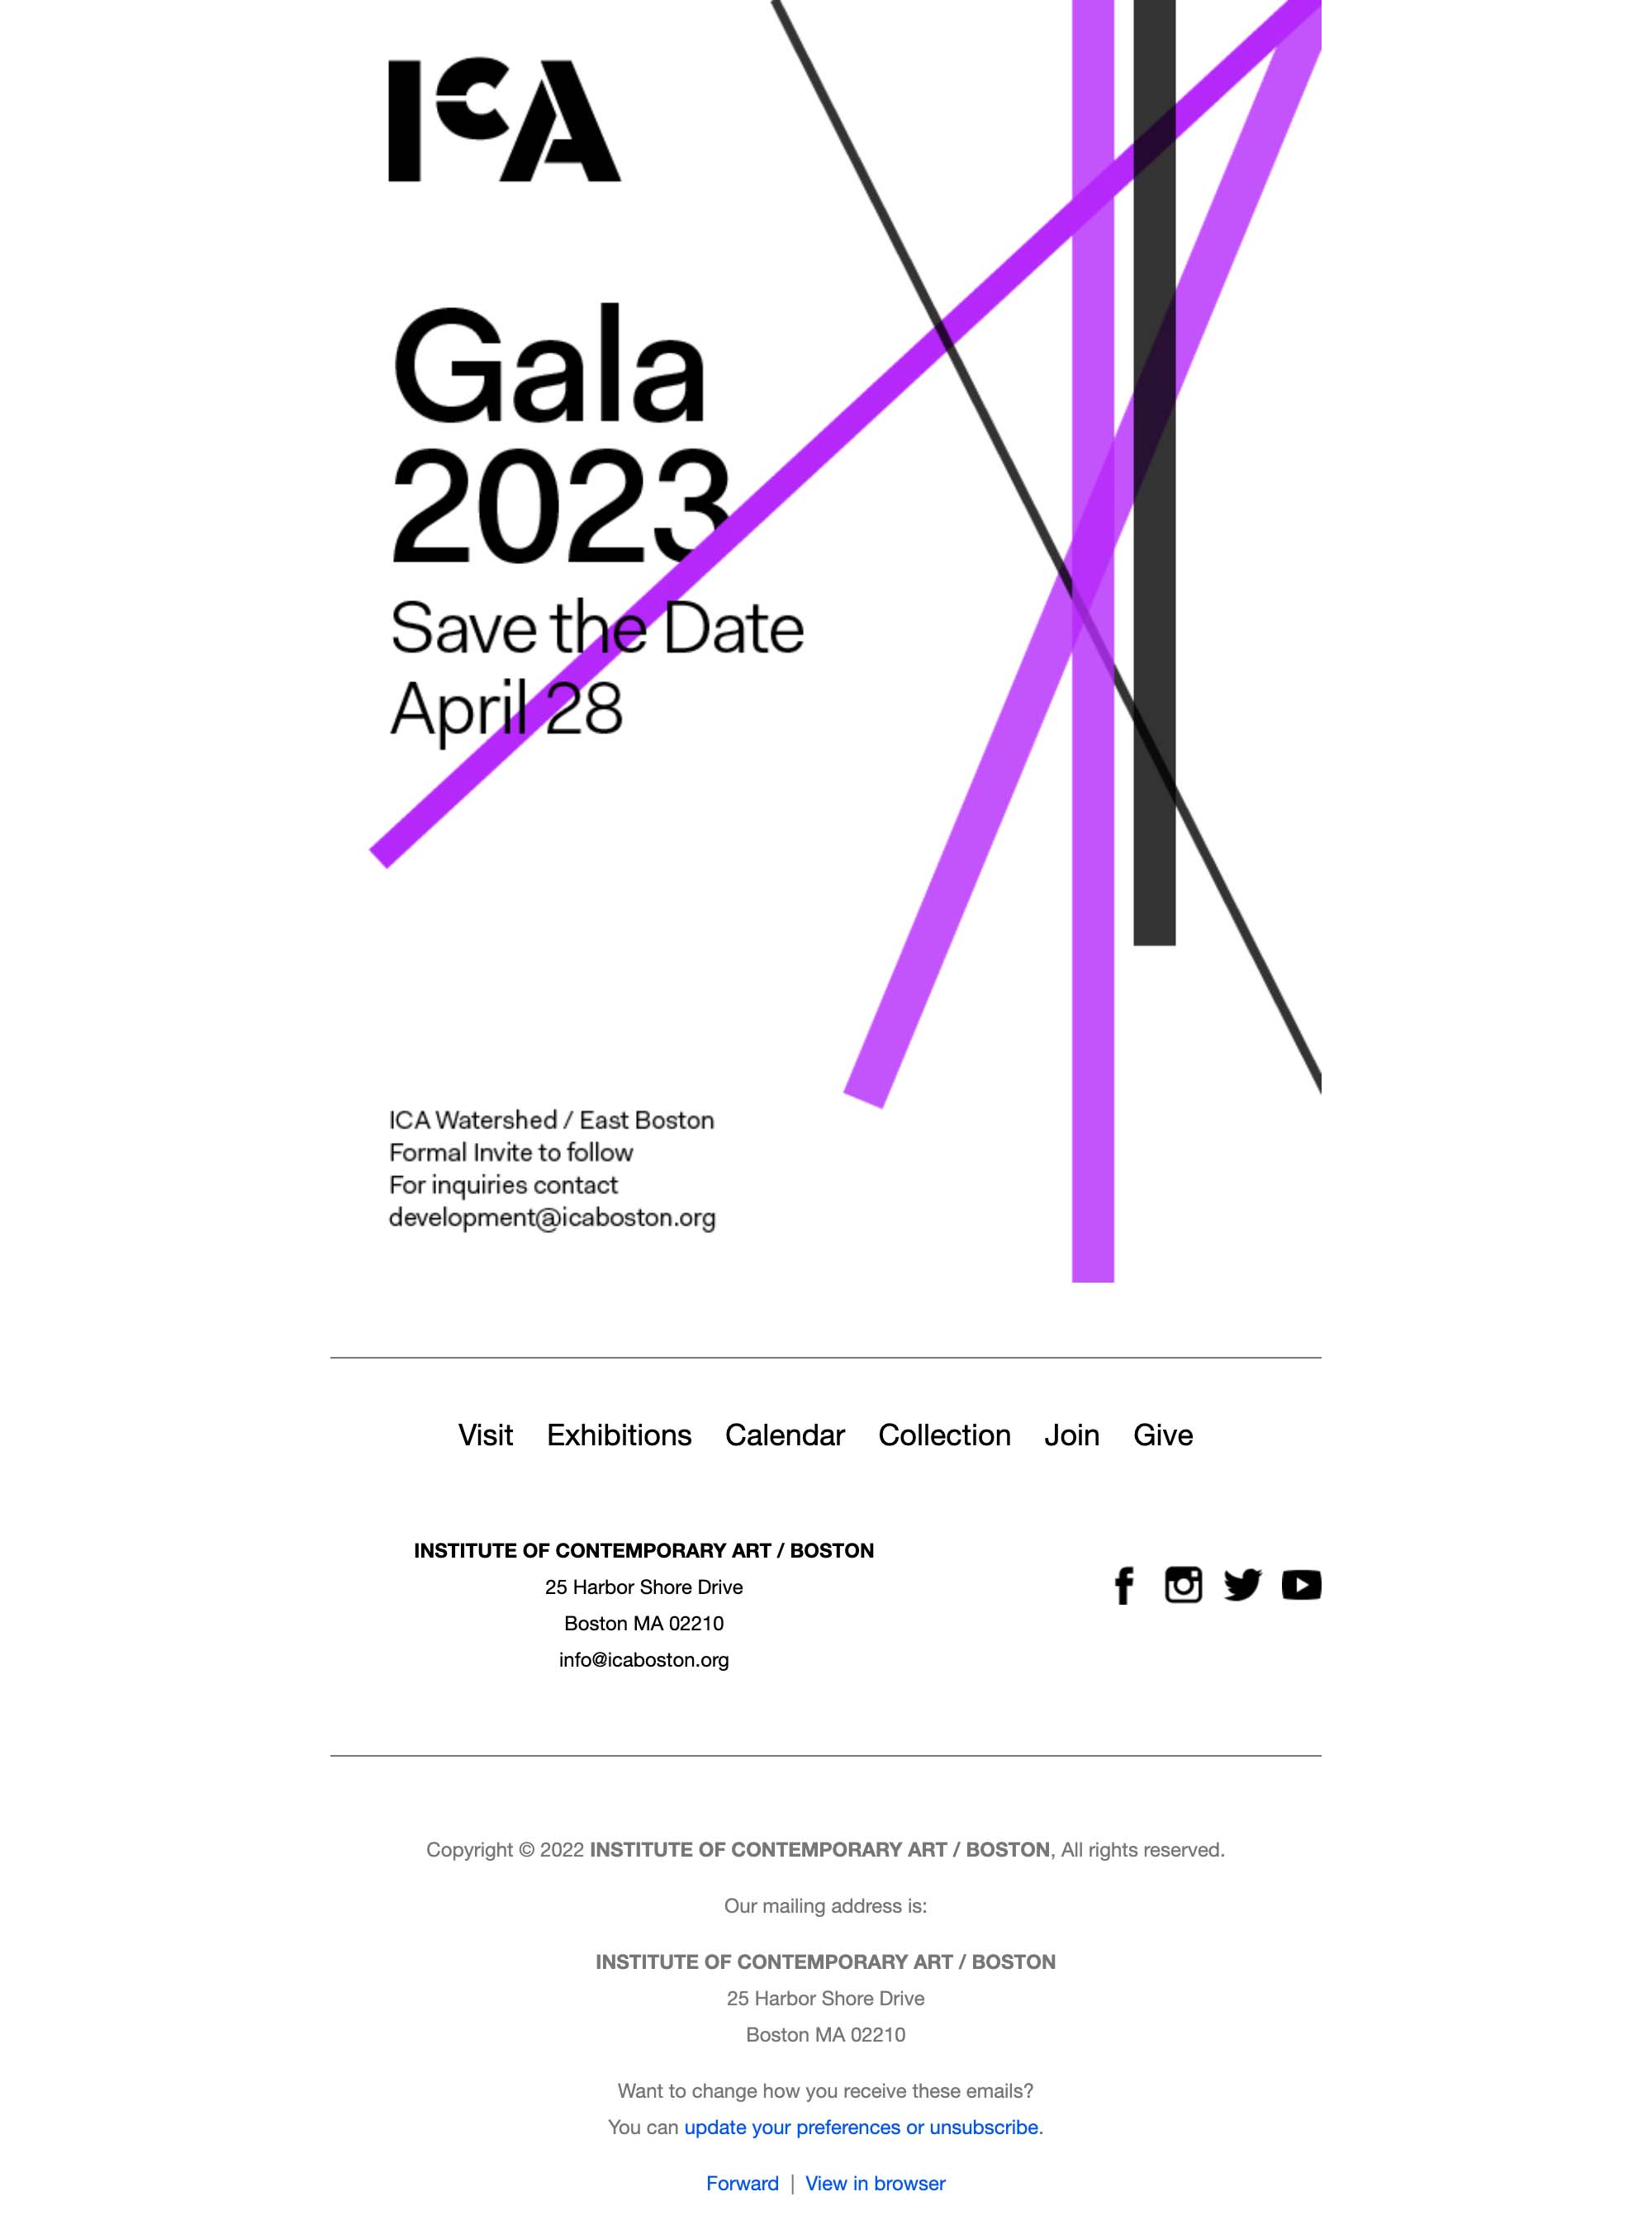 Save the Date: ICA Gala 2023 - desktop view